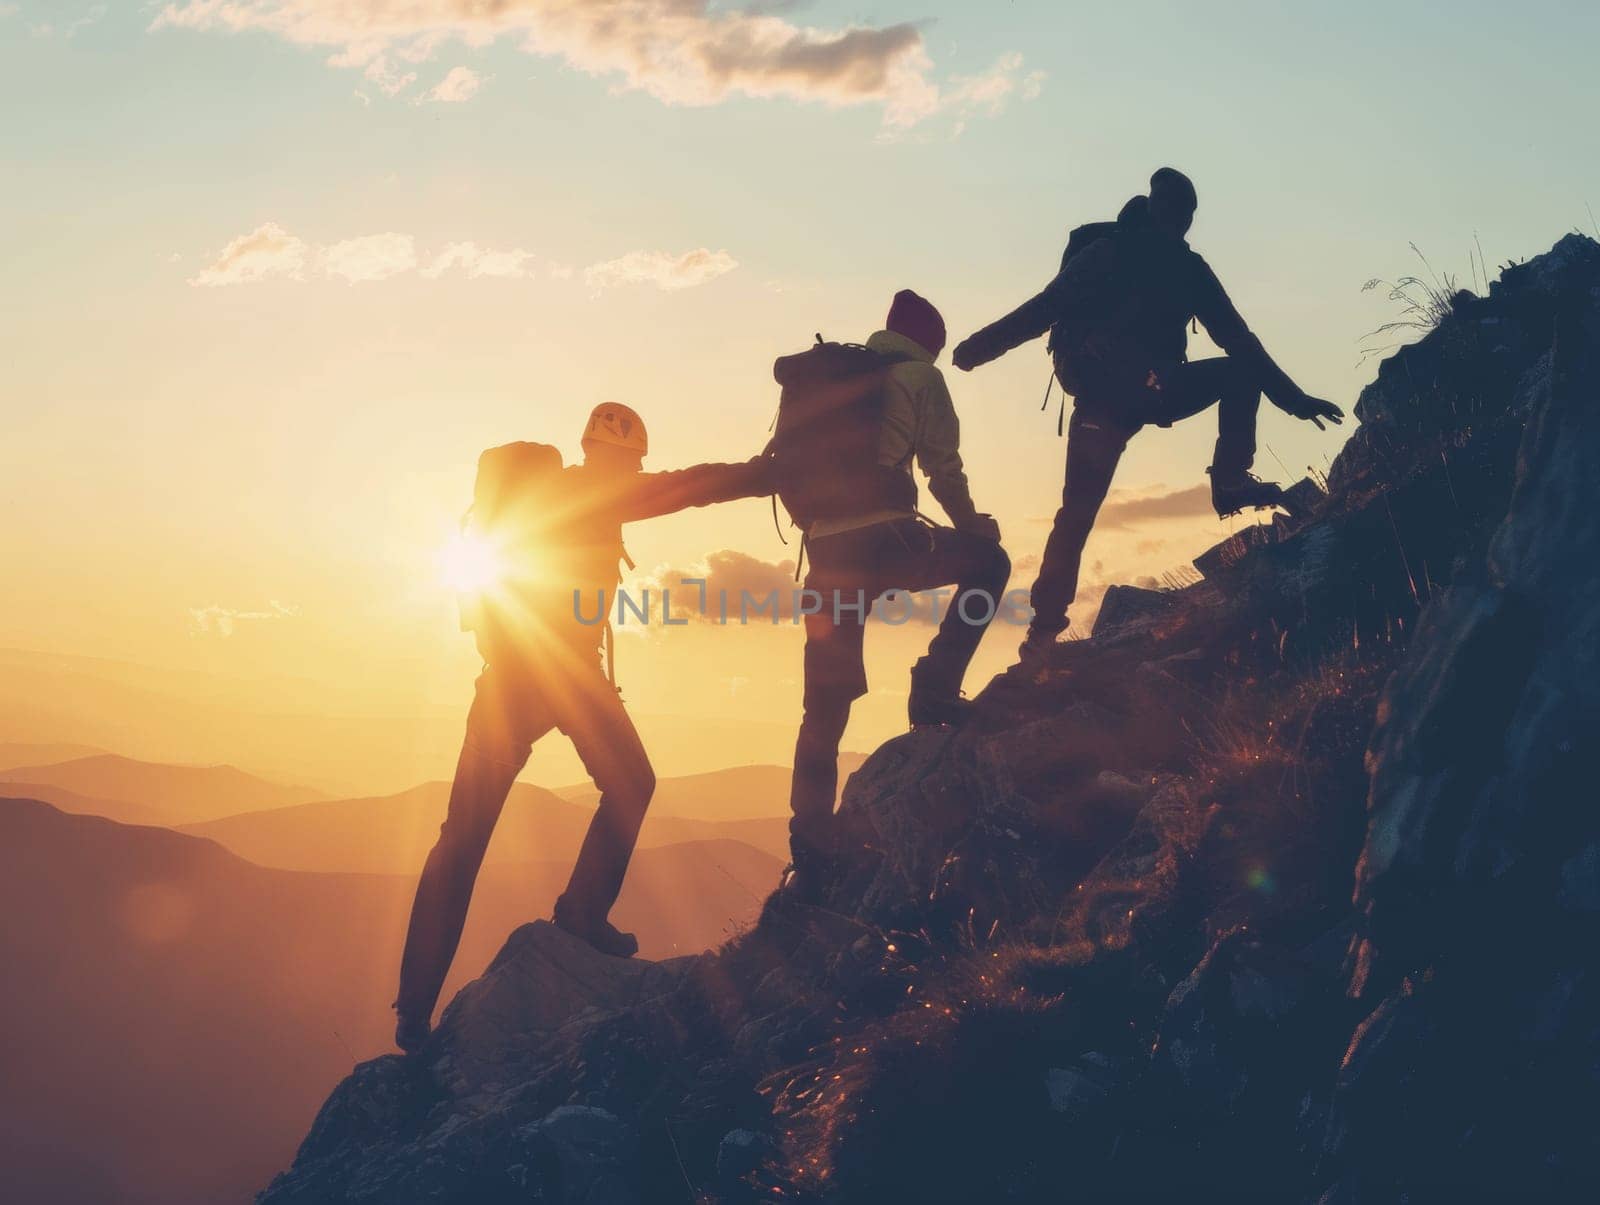 Silhouettes of friends climbing reach the mountain peak as a team at sunset by papatonic